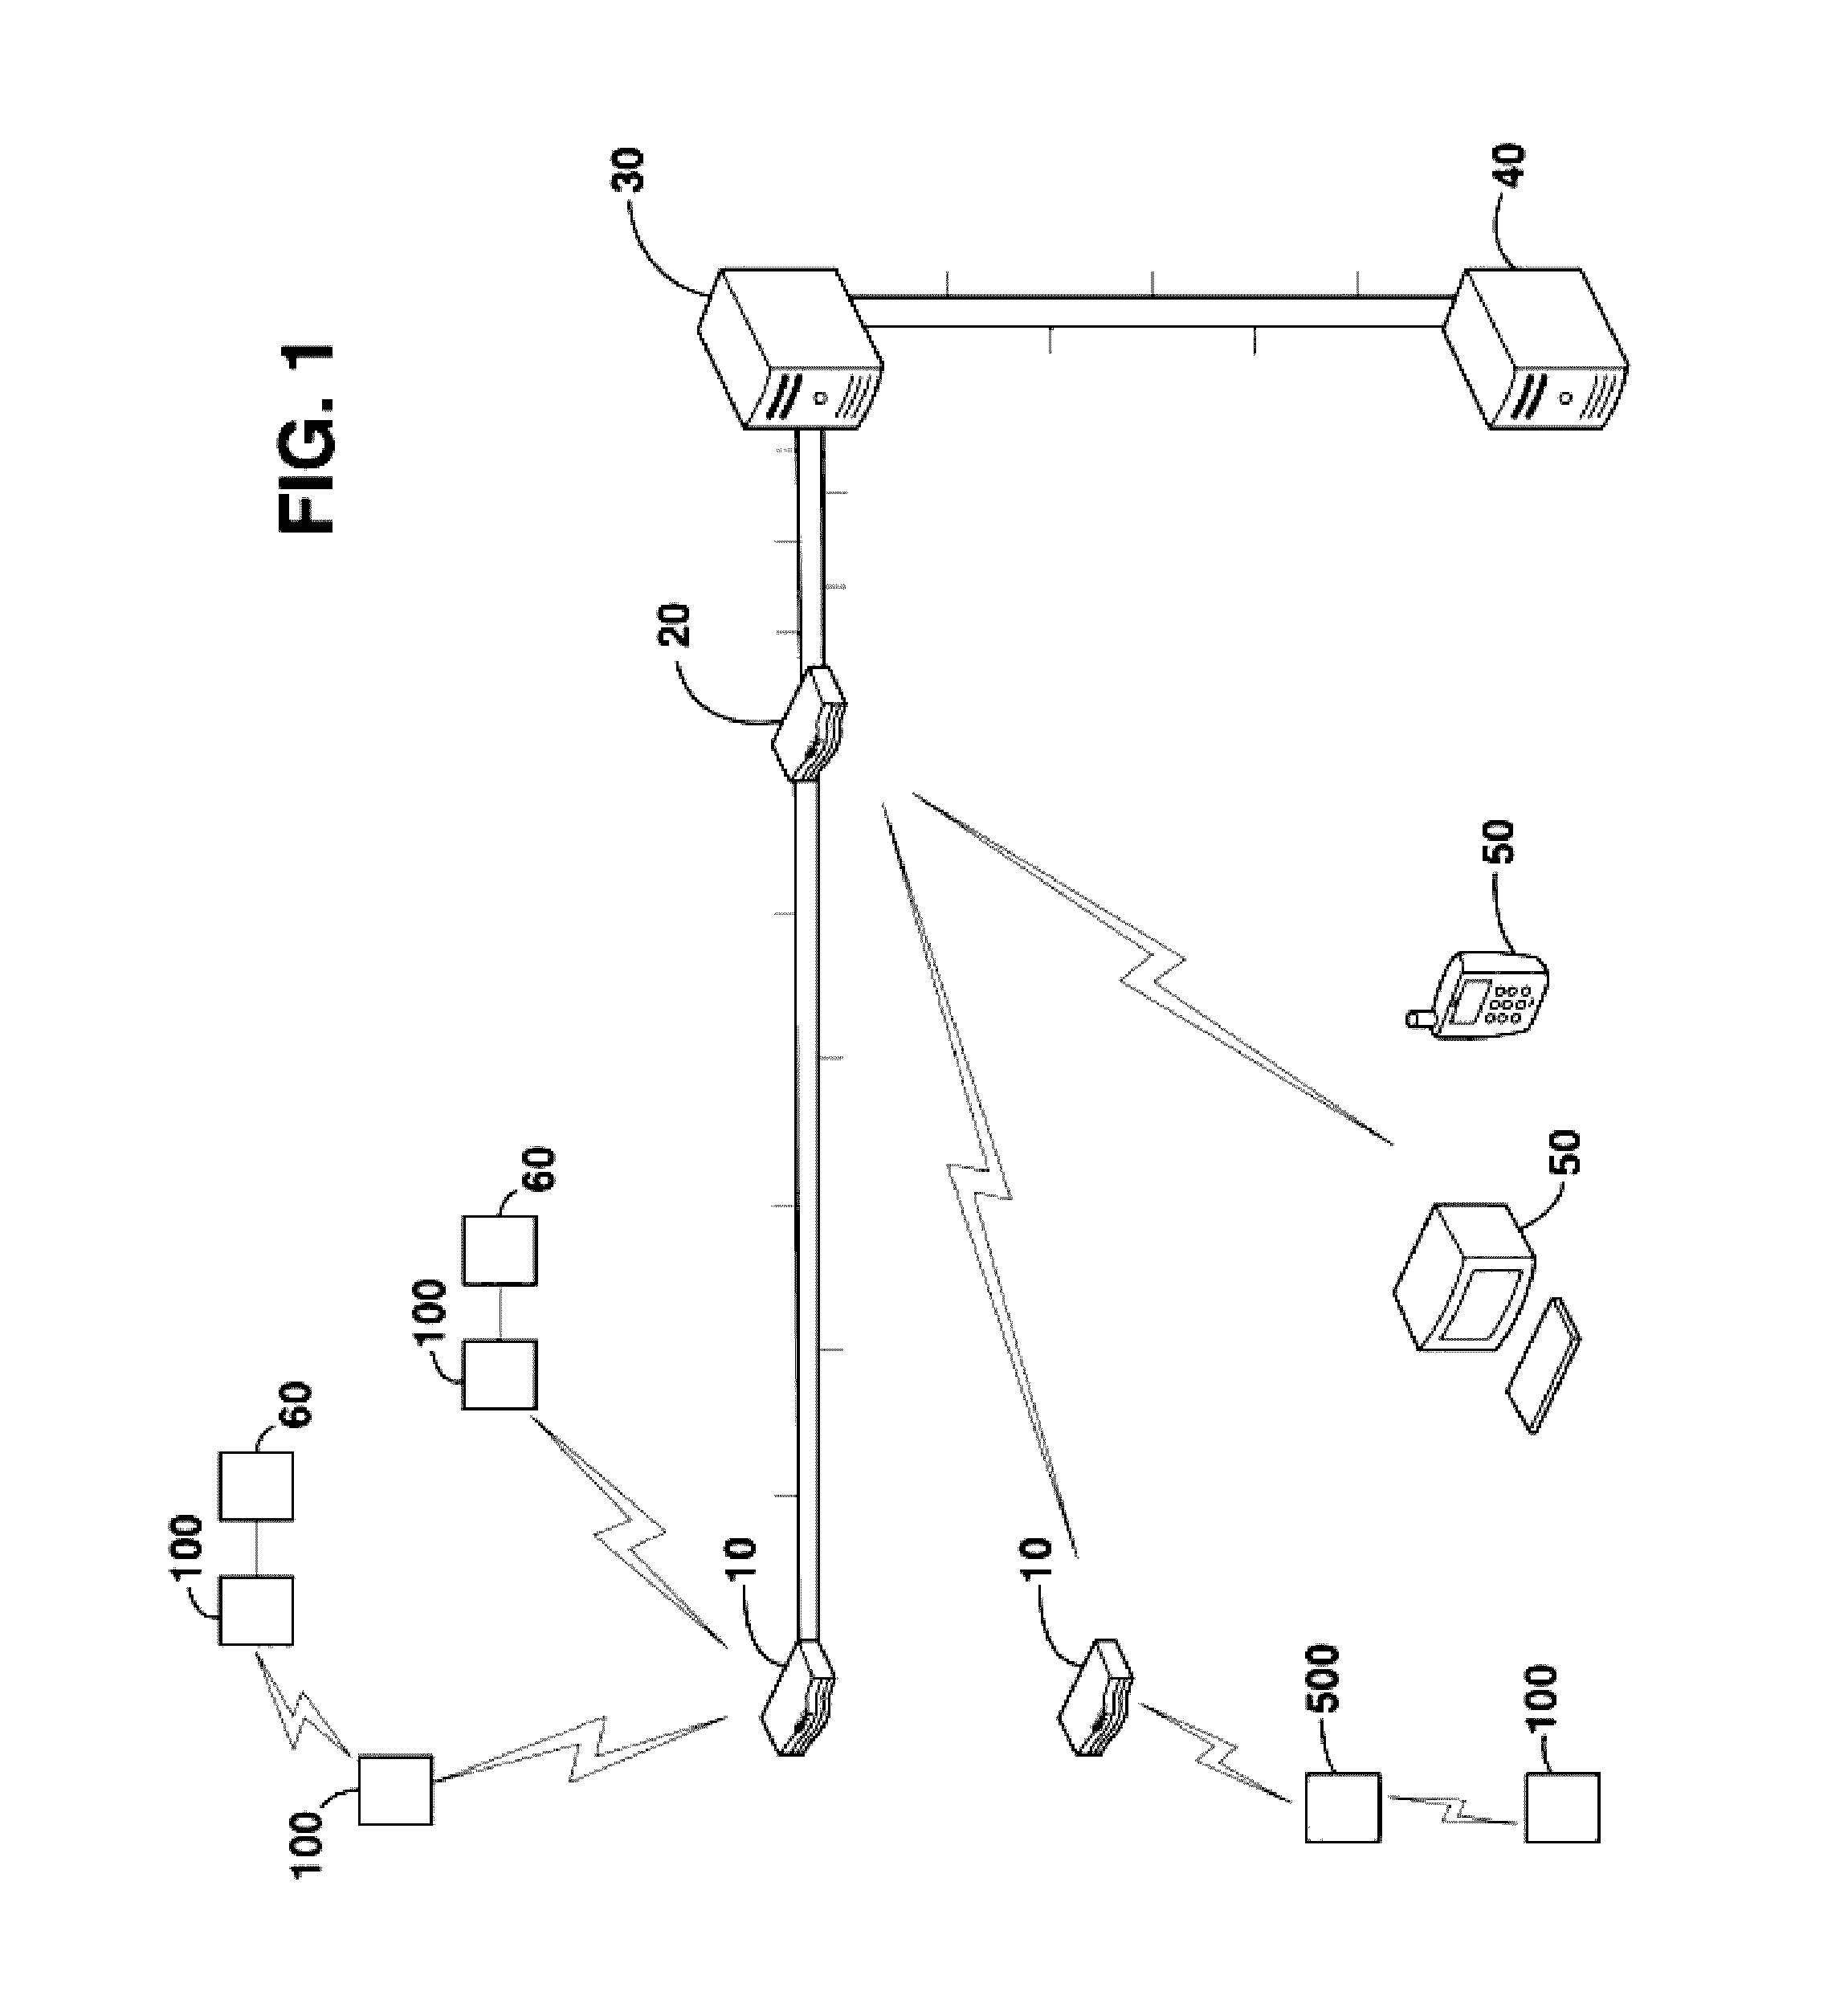 System and method for providing and managing electricity